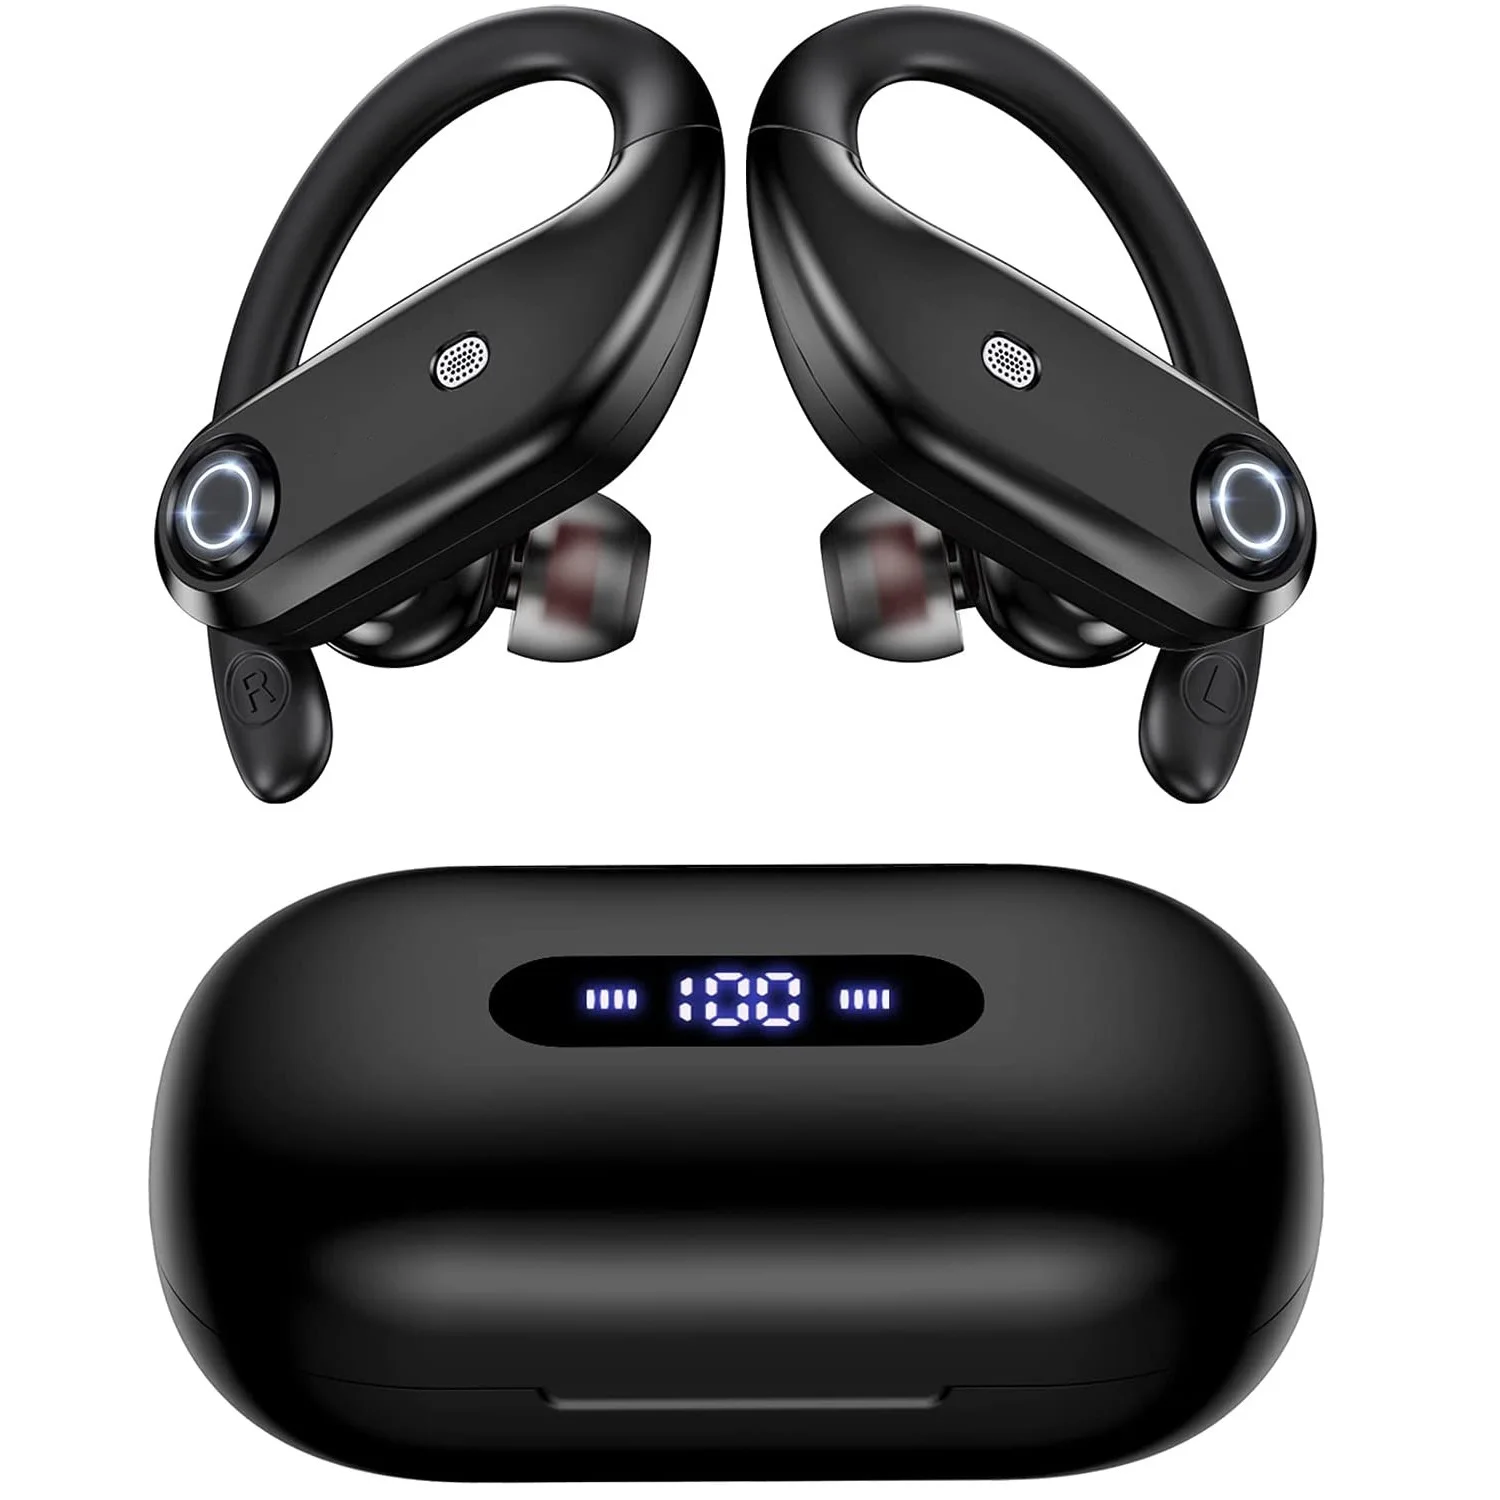 Wireless Headphones Bluetooth V5.0 Earphone Double Units 4 Speaker Music Headset Sport Earbud LED Power Display HD Call With Mic